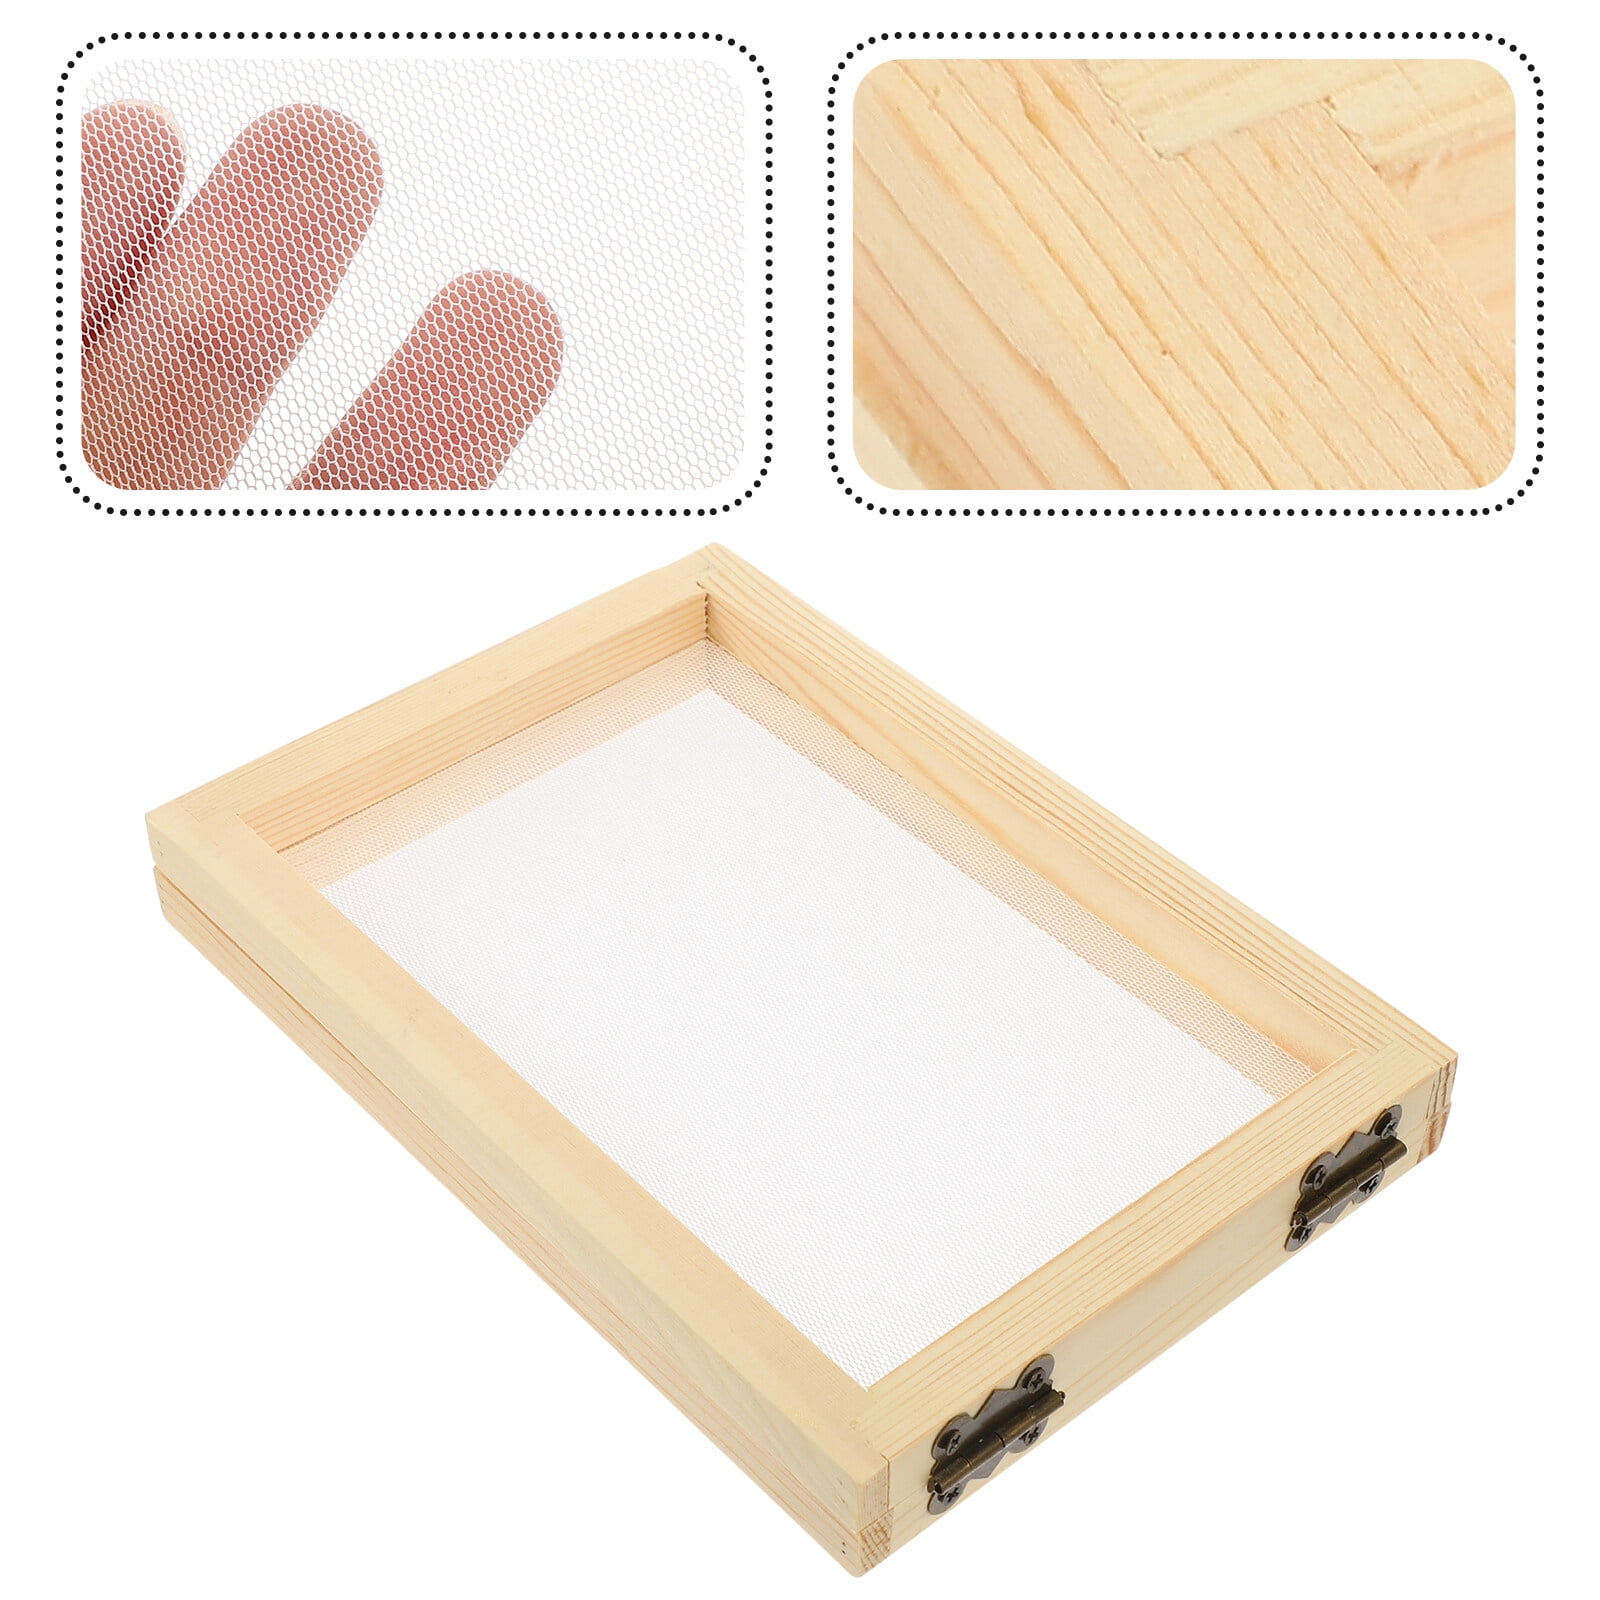 6 Inch Paper Making Screen Wooden Mesh Frame Mould Deckle With Mesh  Replacement For Kids DIY Manual